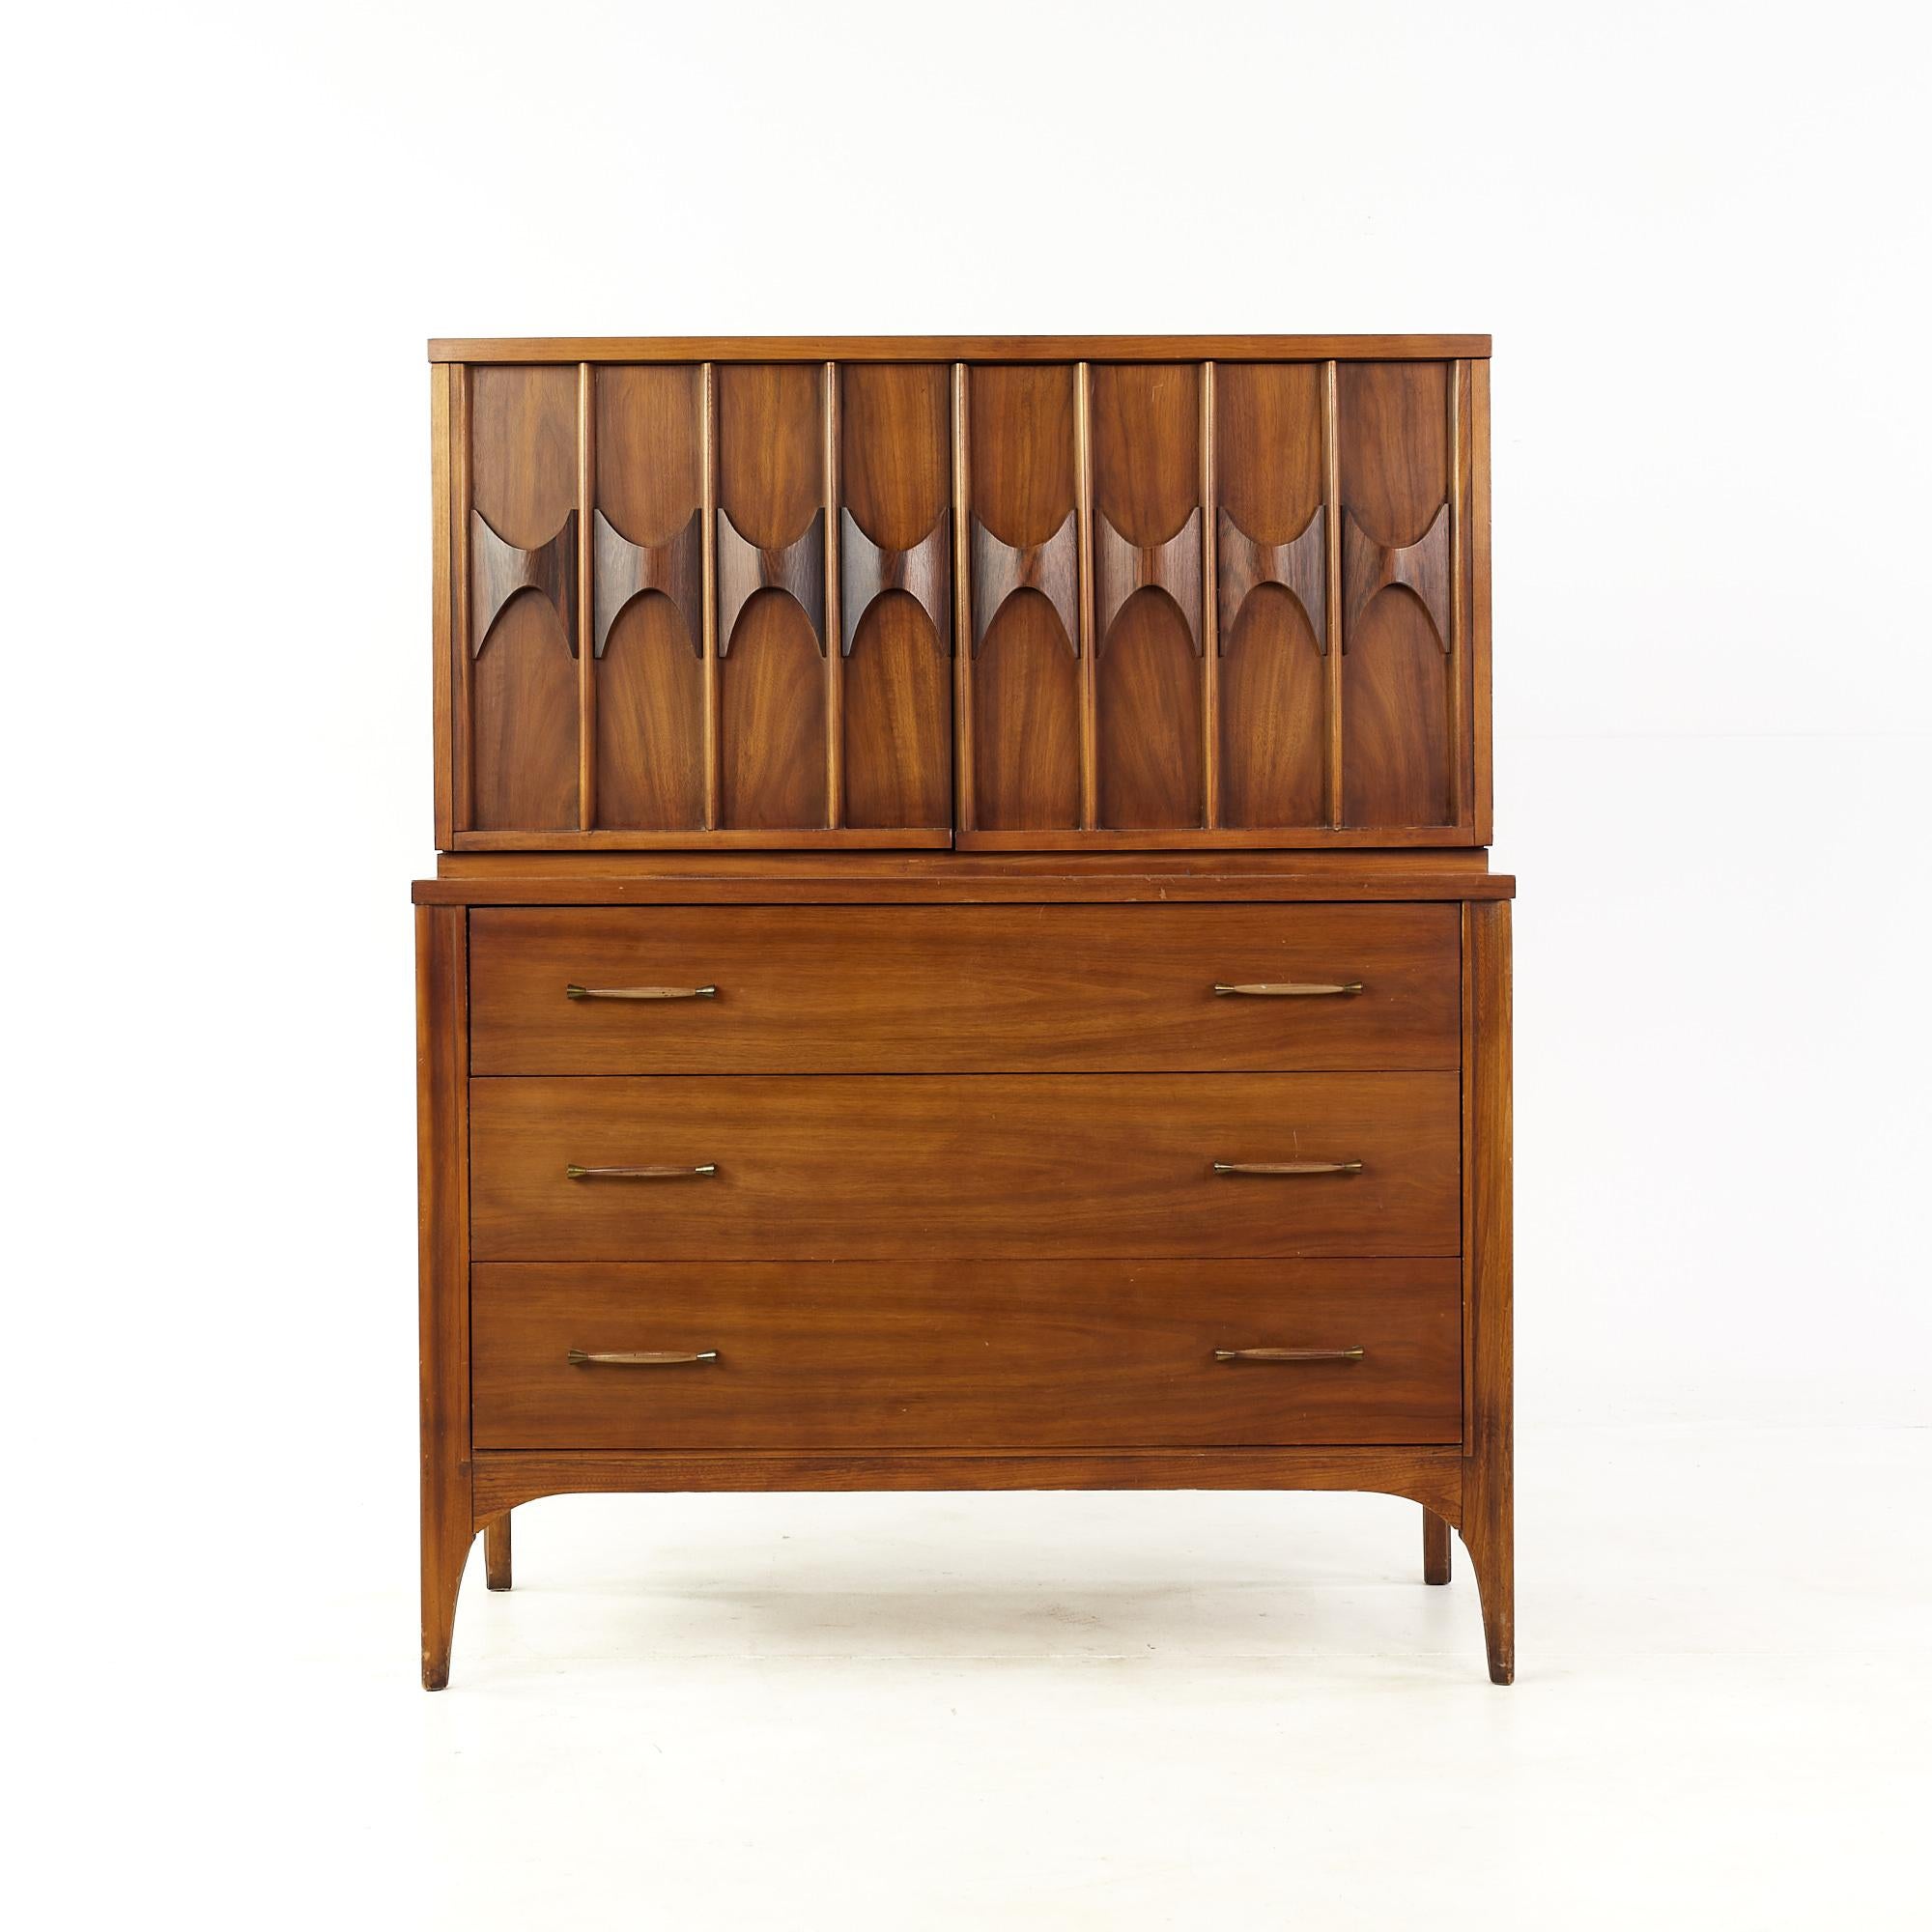 Kent Coffey Perspecta mid century walnut and rosewood Armoire Gentlemans chest highboy dresser

This armoire measures: 42 wide x 20 deep x 52 inches high

All pieces of furniture can be had in what we call restored vintage condition. That means